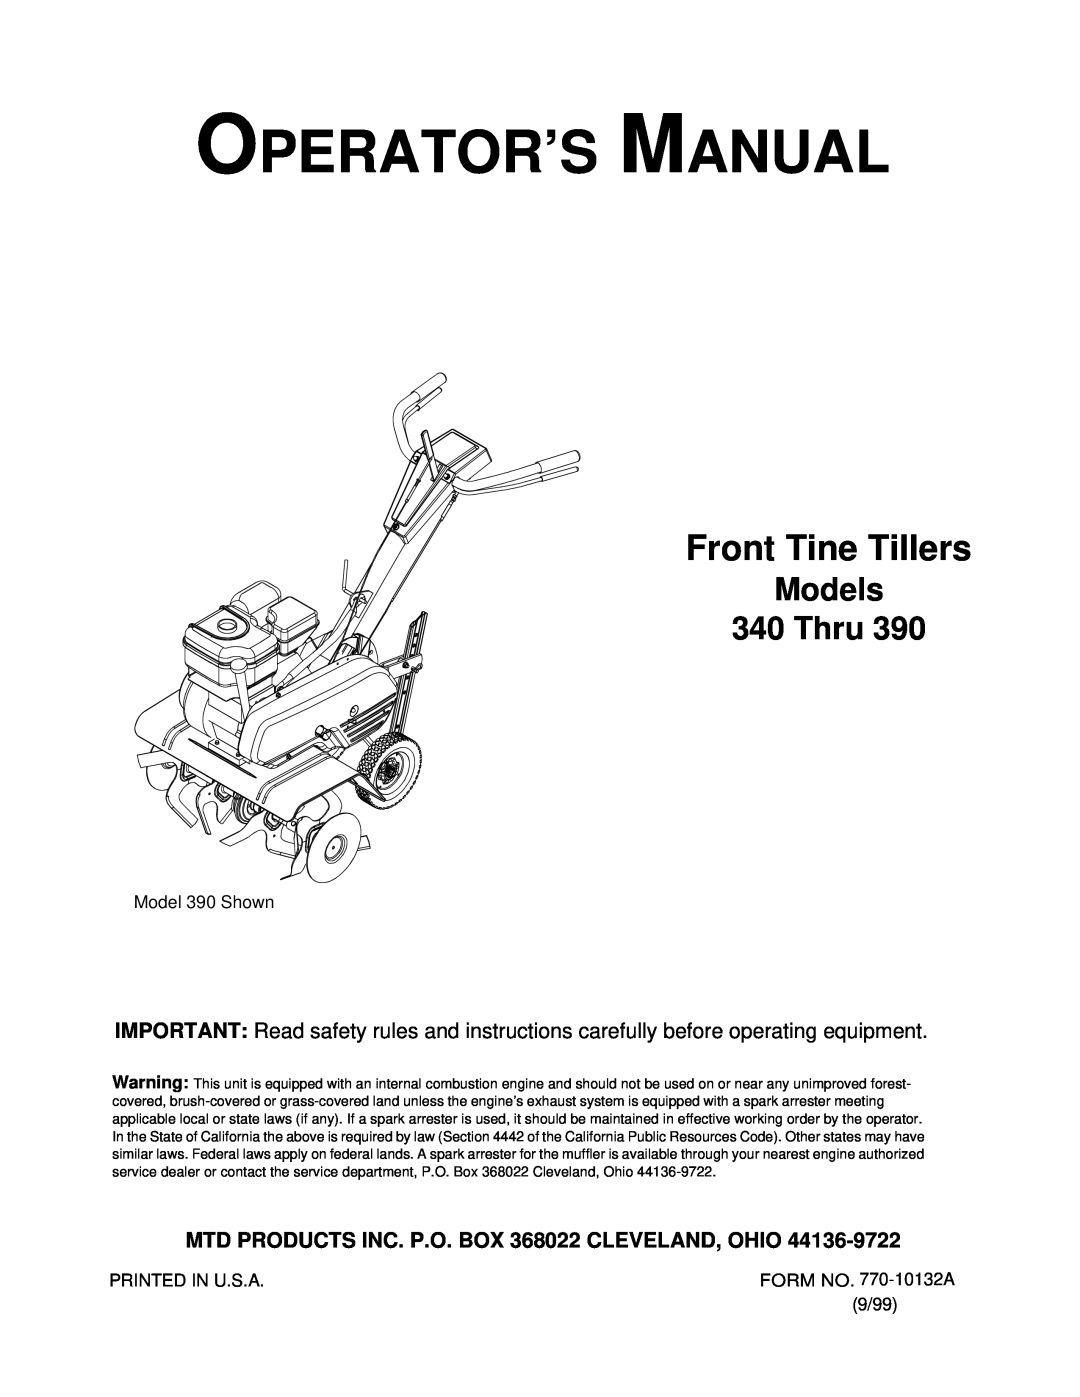 MTD 390 Shown manual MTD PRODUCTS INC. P.O. BOX 368022 CLEVELAND, OHIO, Operator’S Manual, Front Tine Tillers 